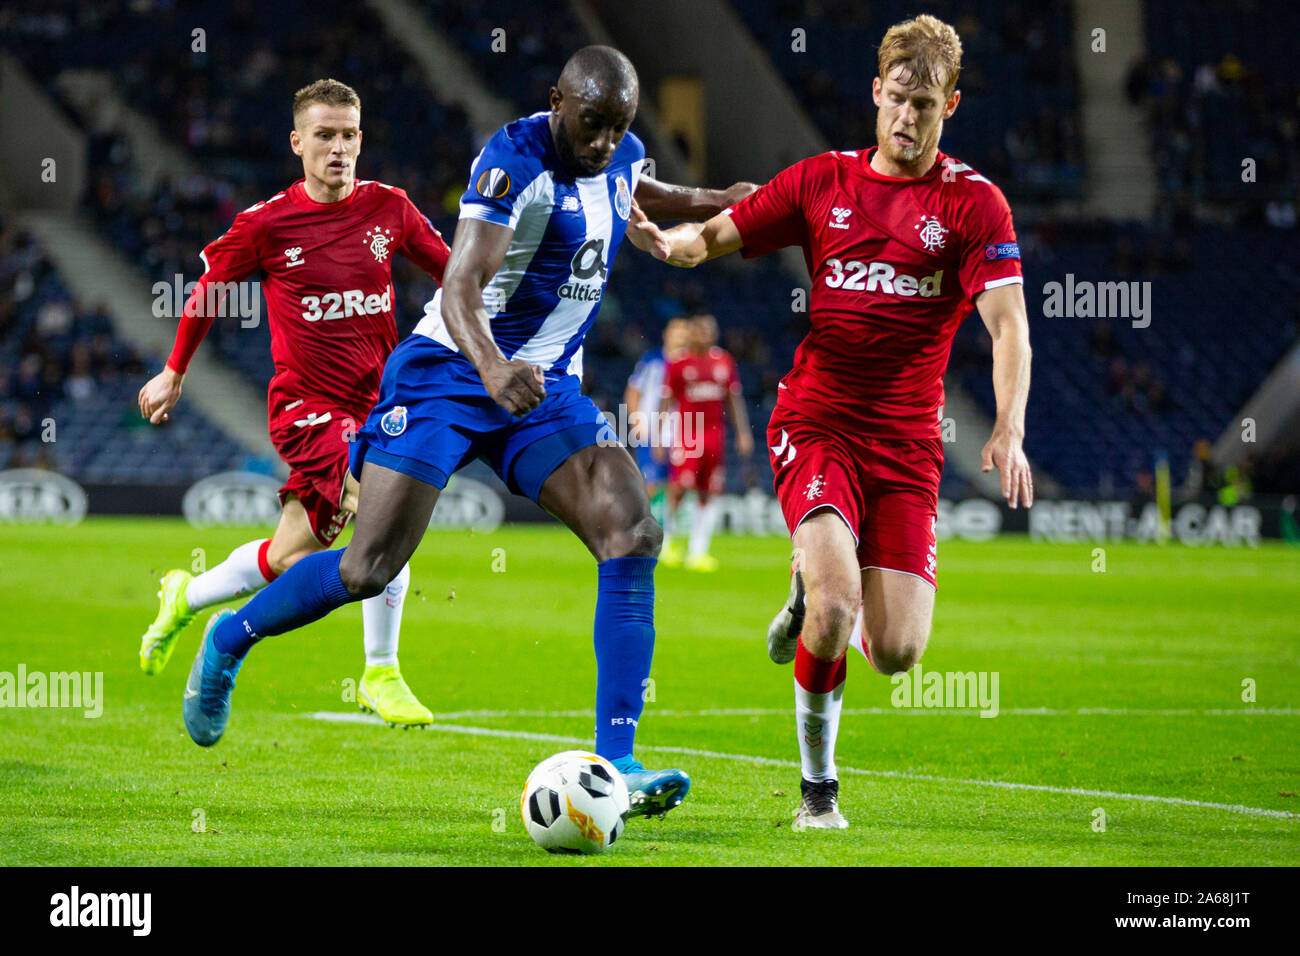 FC Porto's player Moussa Marega (L) and Ranger's player Filip Helander (R) are seen in action during the UEFA Europa League match at Dragon Stadium. (Final score: FC Porto 1:1 Rangers) Stock Photo